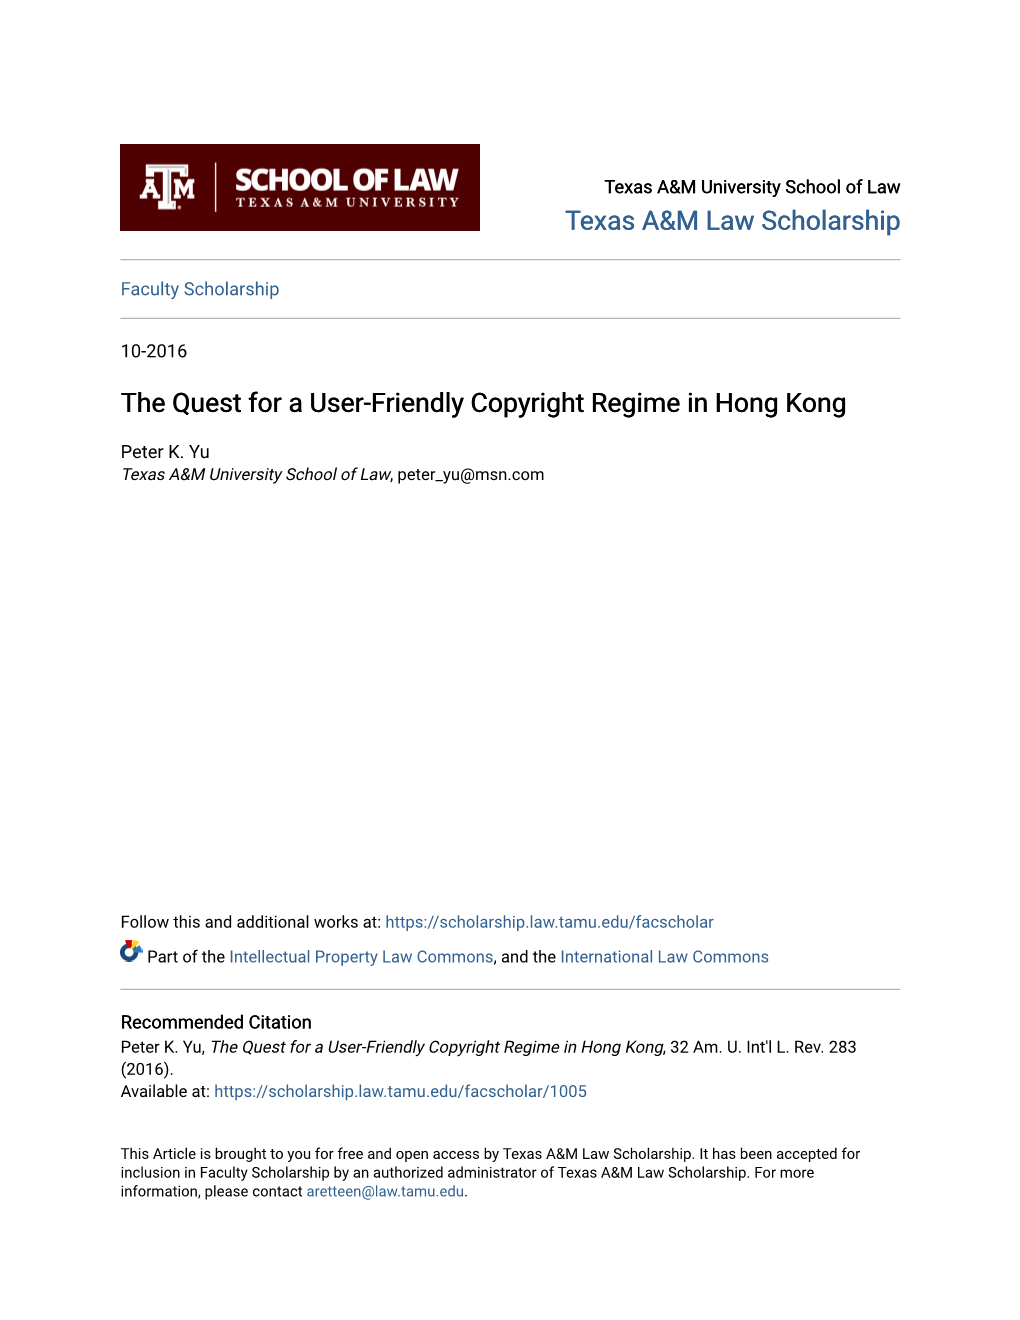 The Quest for a User-Friendly Copyright Regime in Hong Kong